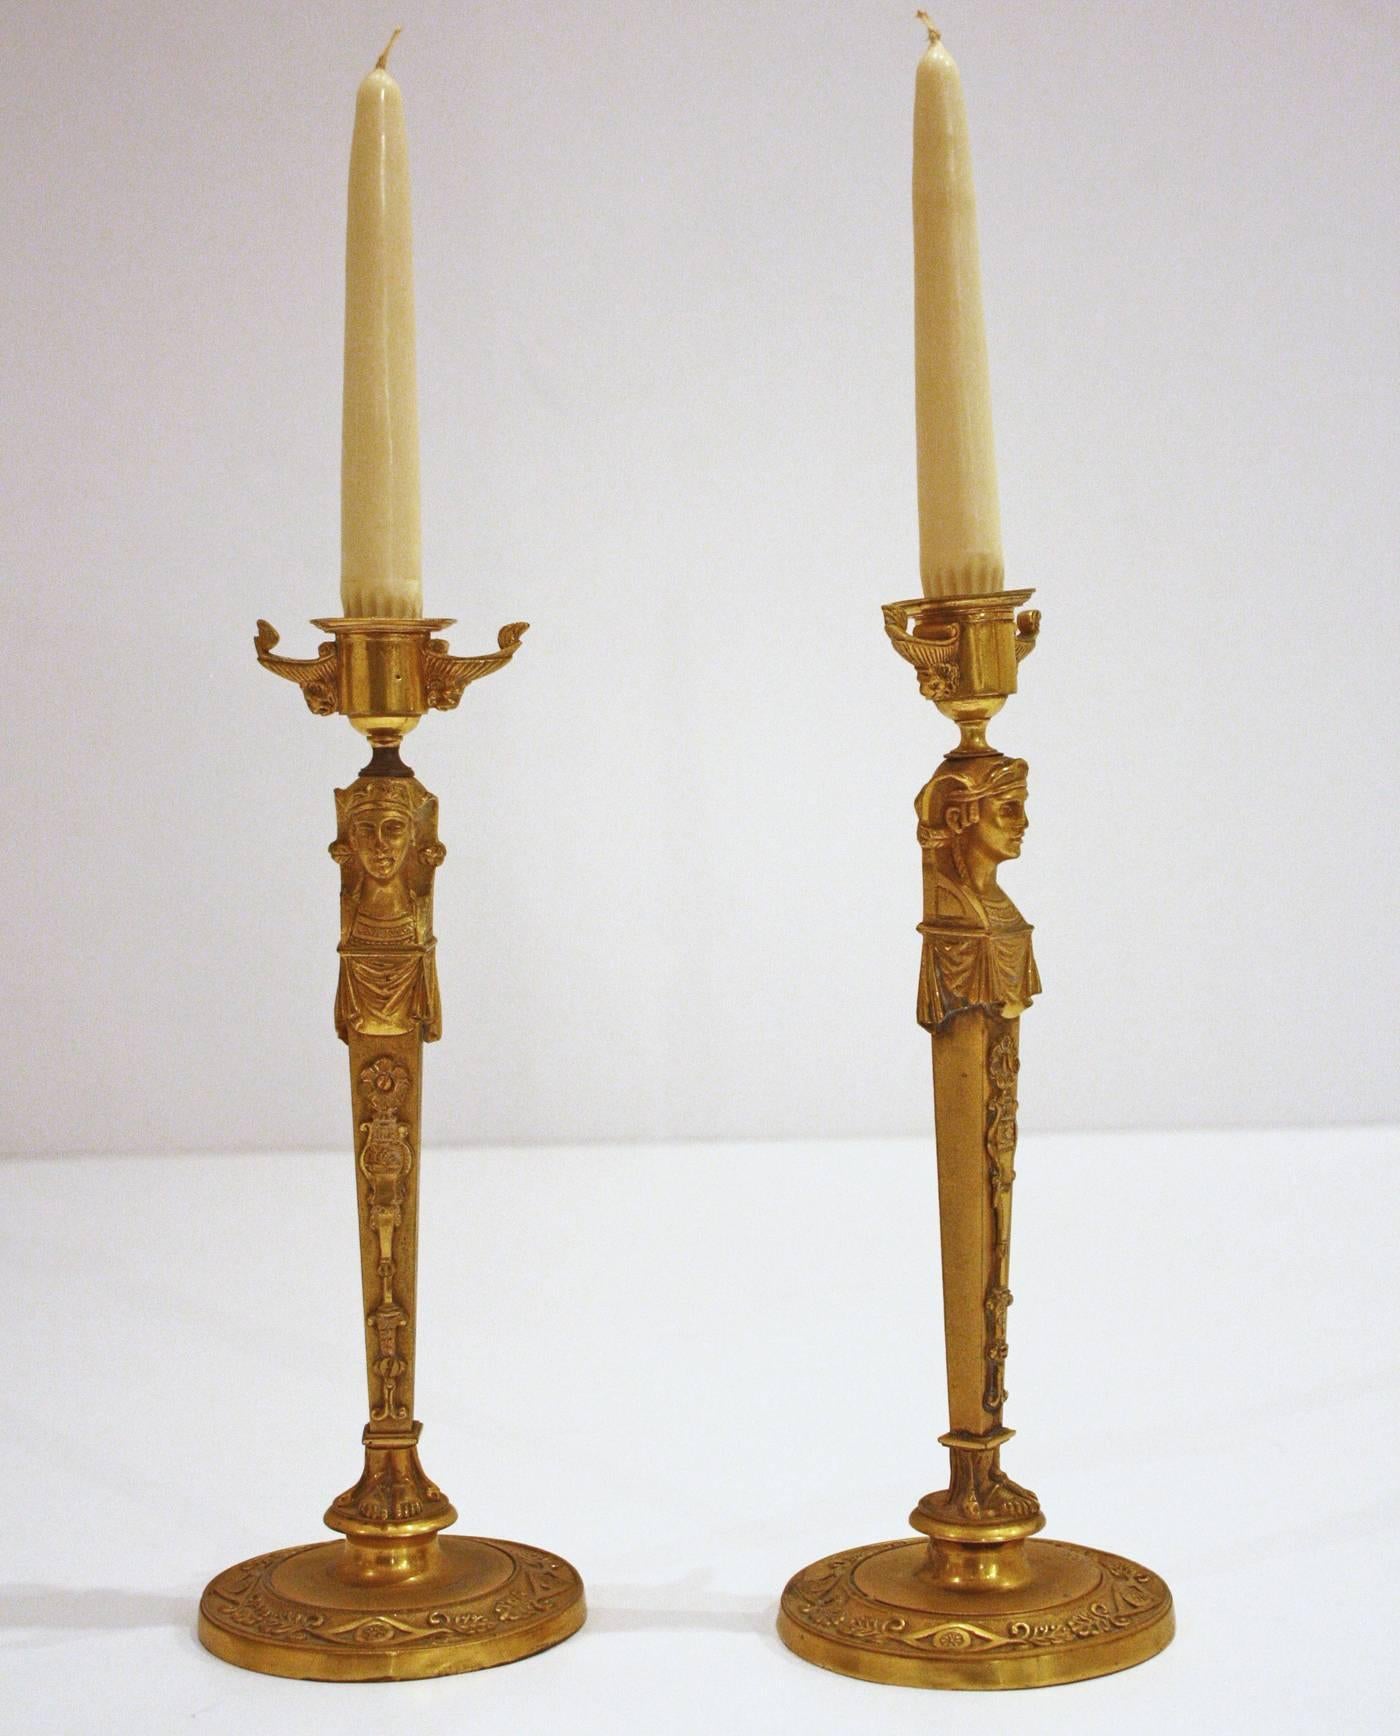 A pair of gilt bronze candlesticks as standing caryatid figures with separate drip pans. Below the drip pans are a pair of handles with lion mask supports. The vase shaped candlesticks have an applied detailing on the front. Below the vase shape are